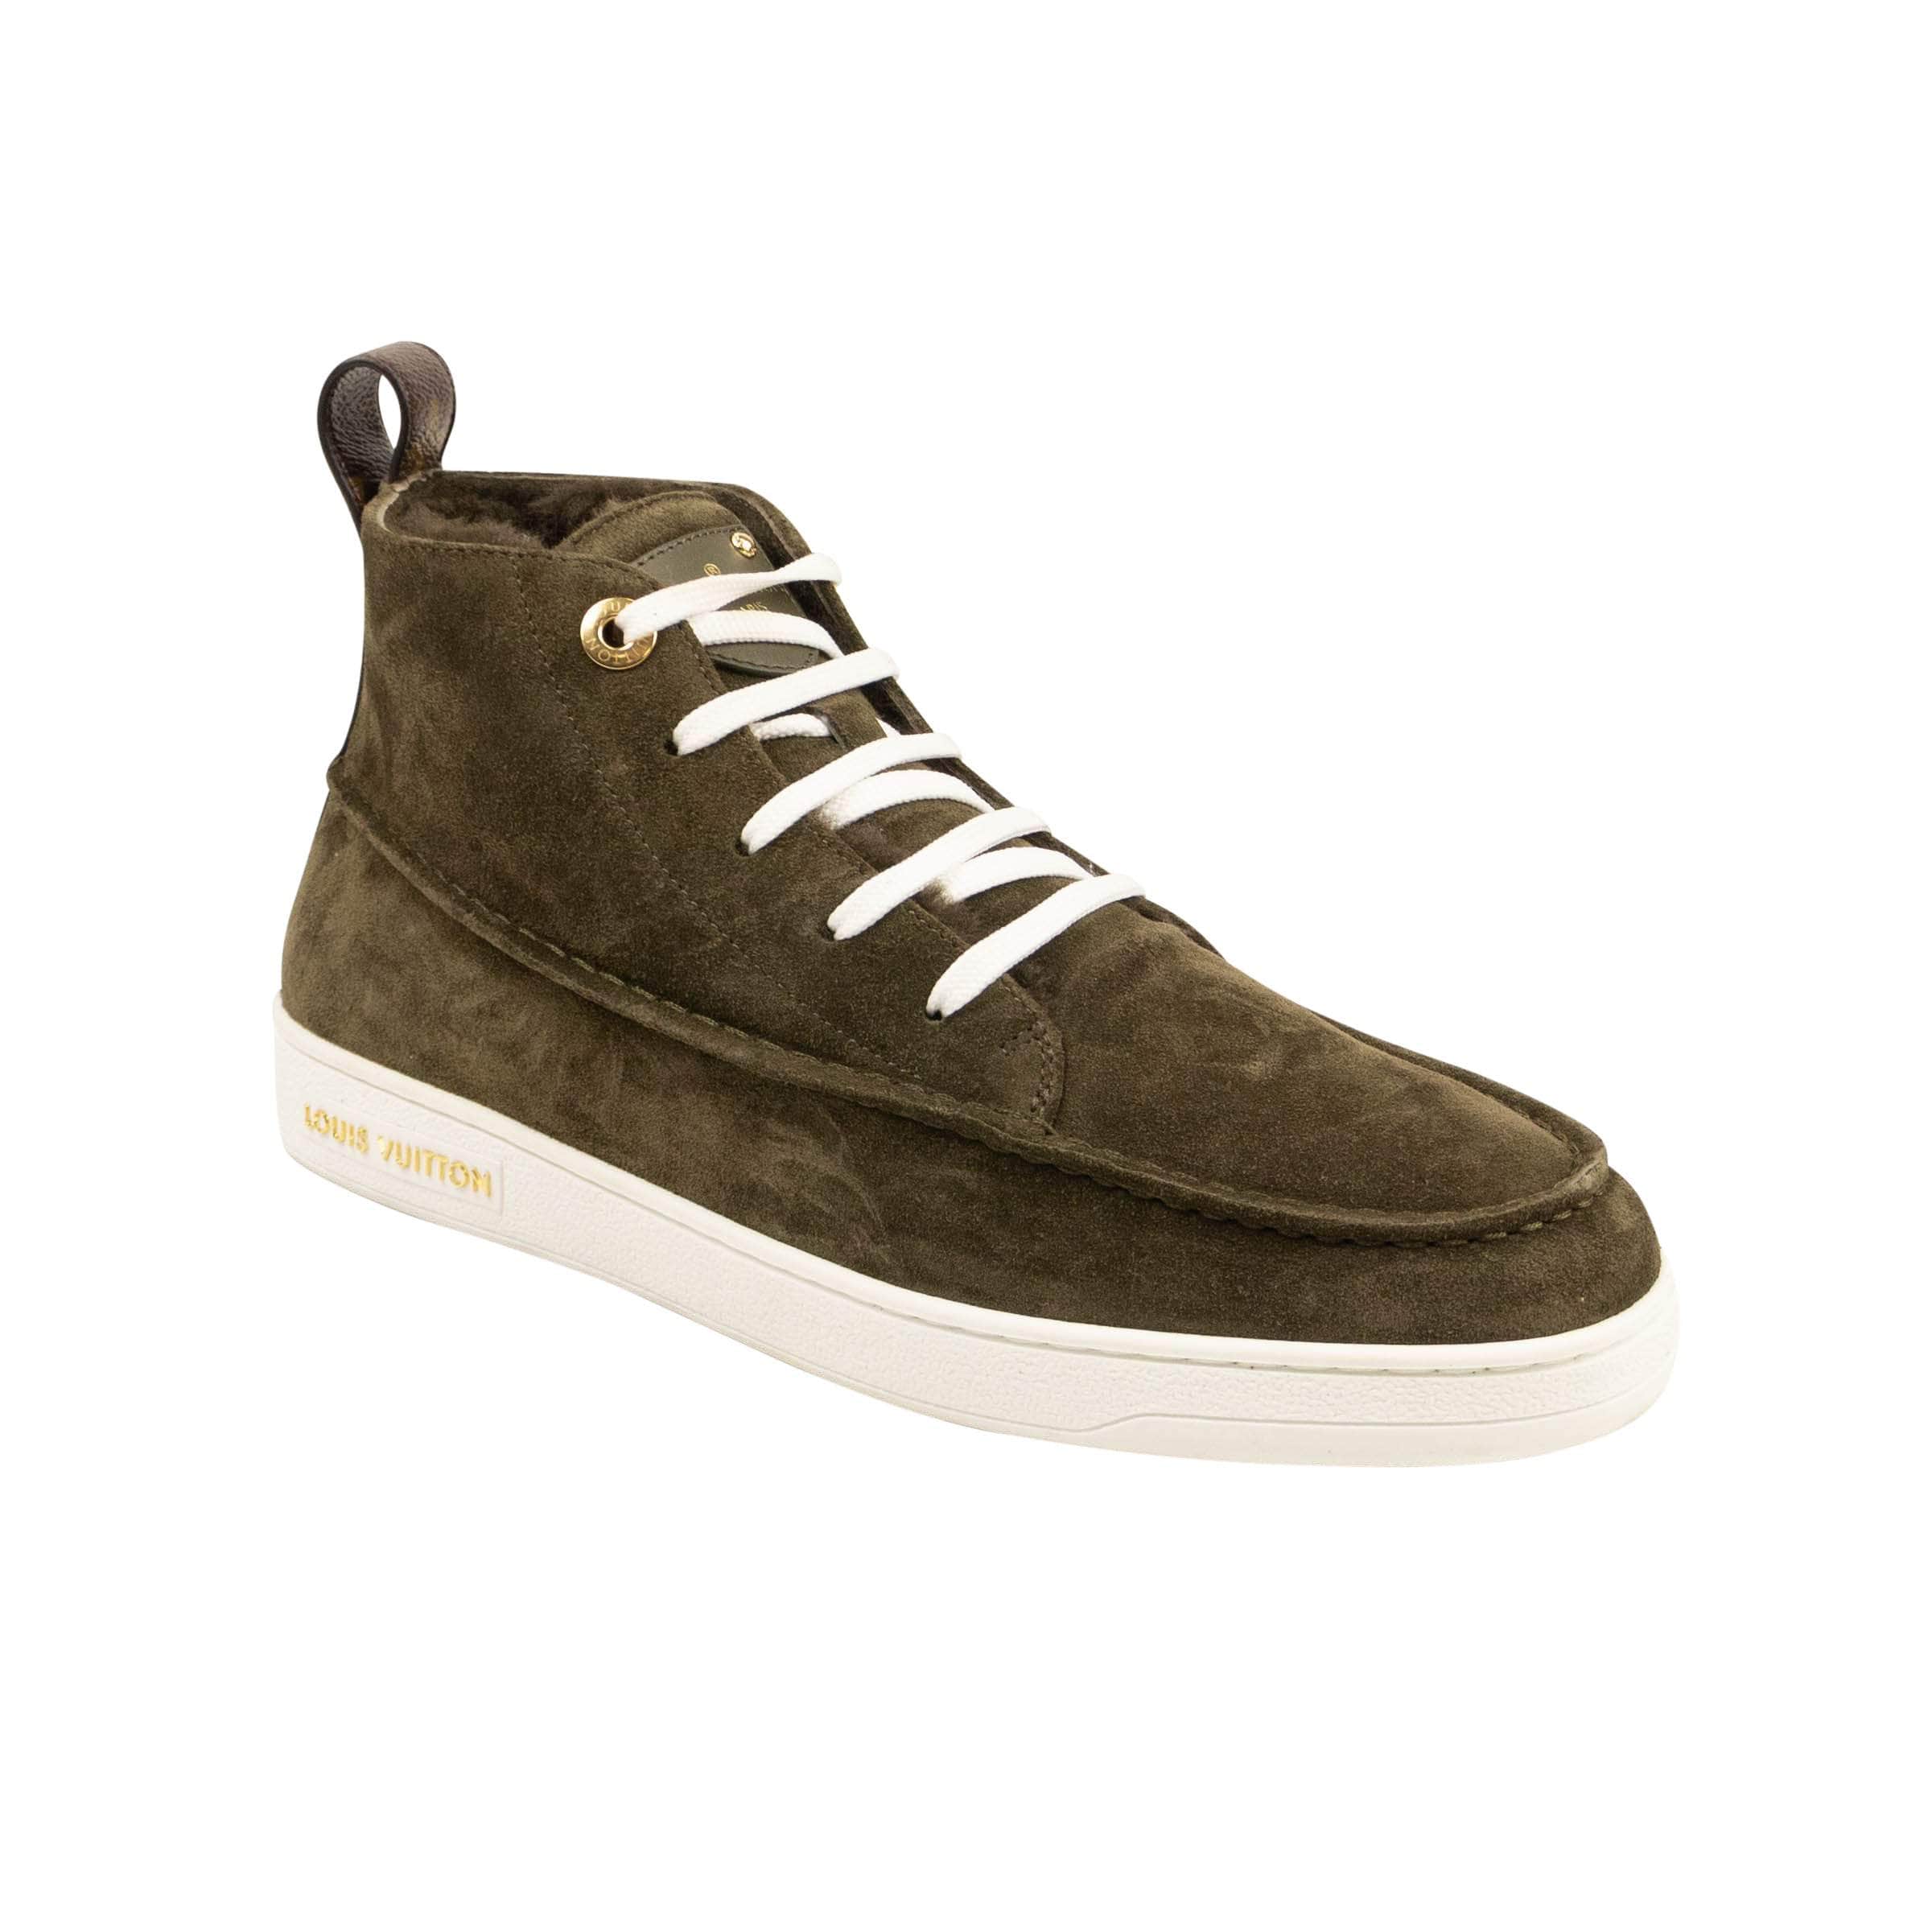 Louis Vuitton 250-500, 500-750, channelenable-all, chicmi, couponcollection, gender-womens, main-shoes, size-37-5, size-38-5, SPO, stadiumgoods Green Suede Stellar Sneaker Boot